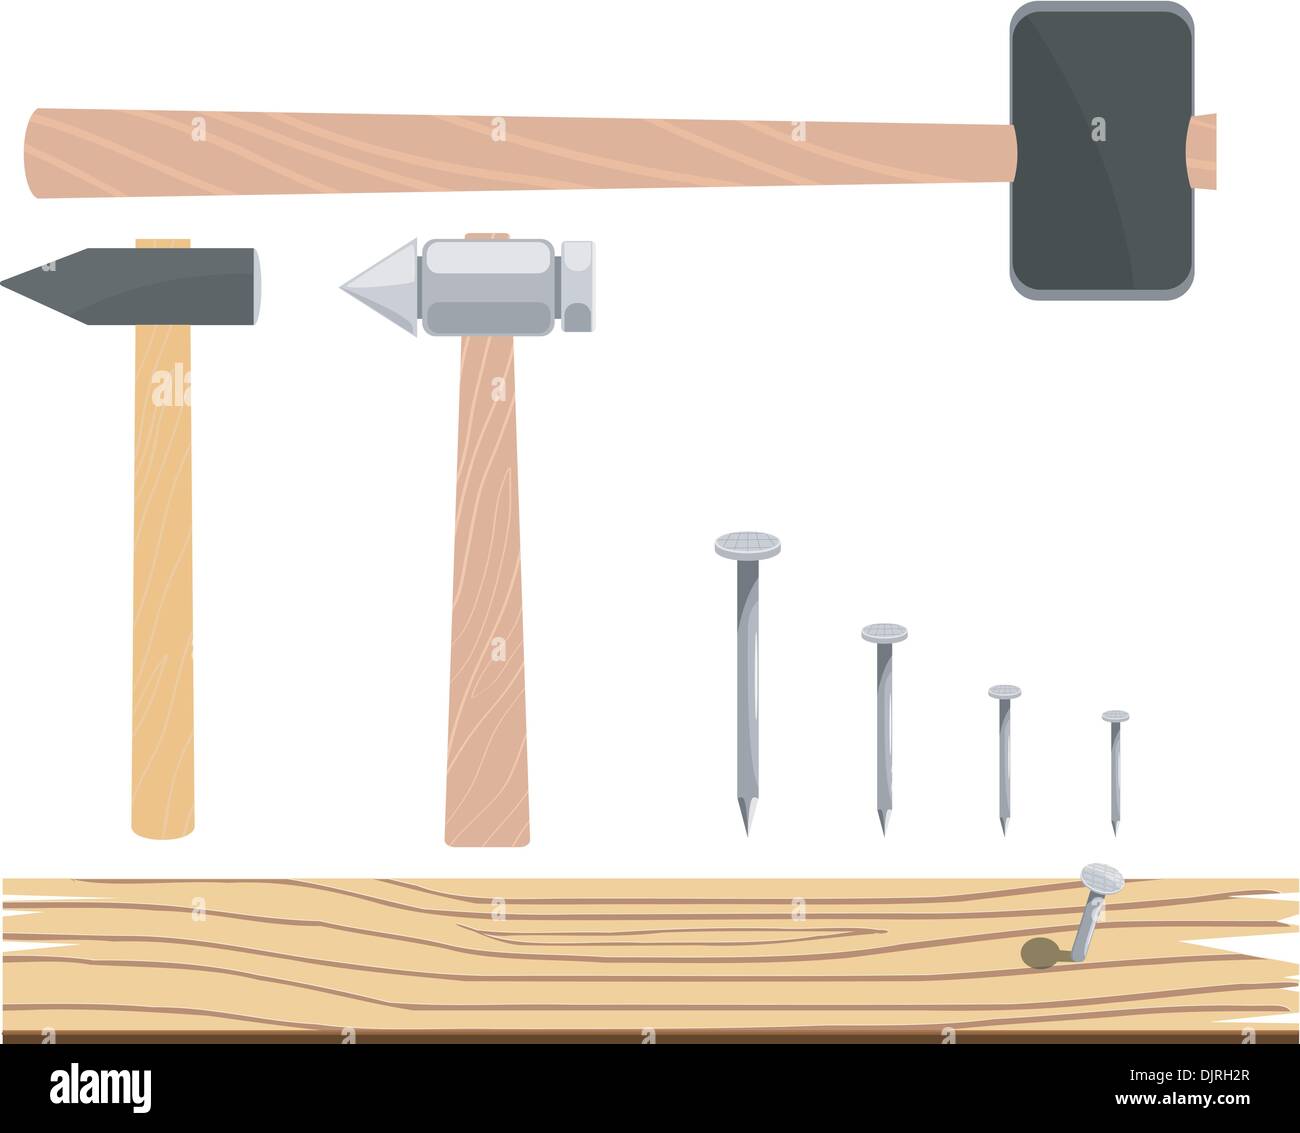 Vector illustration of a set of hammers Stock Vector